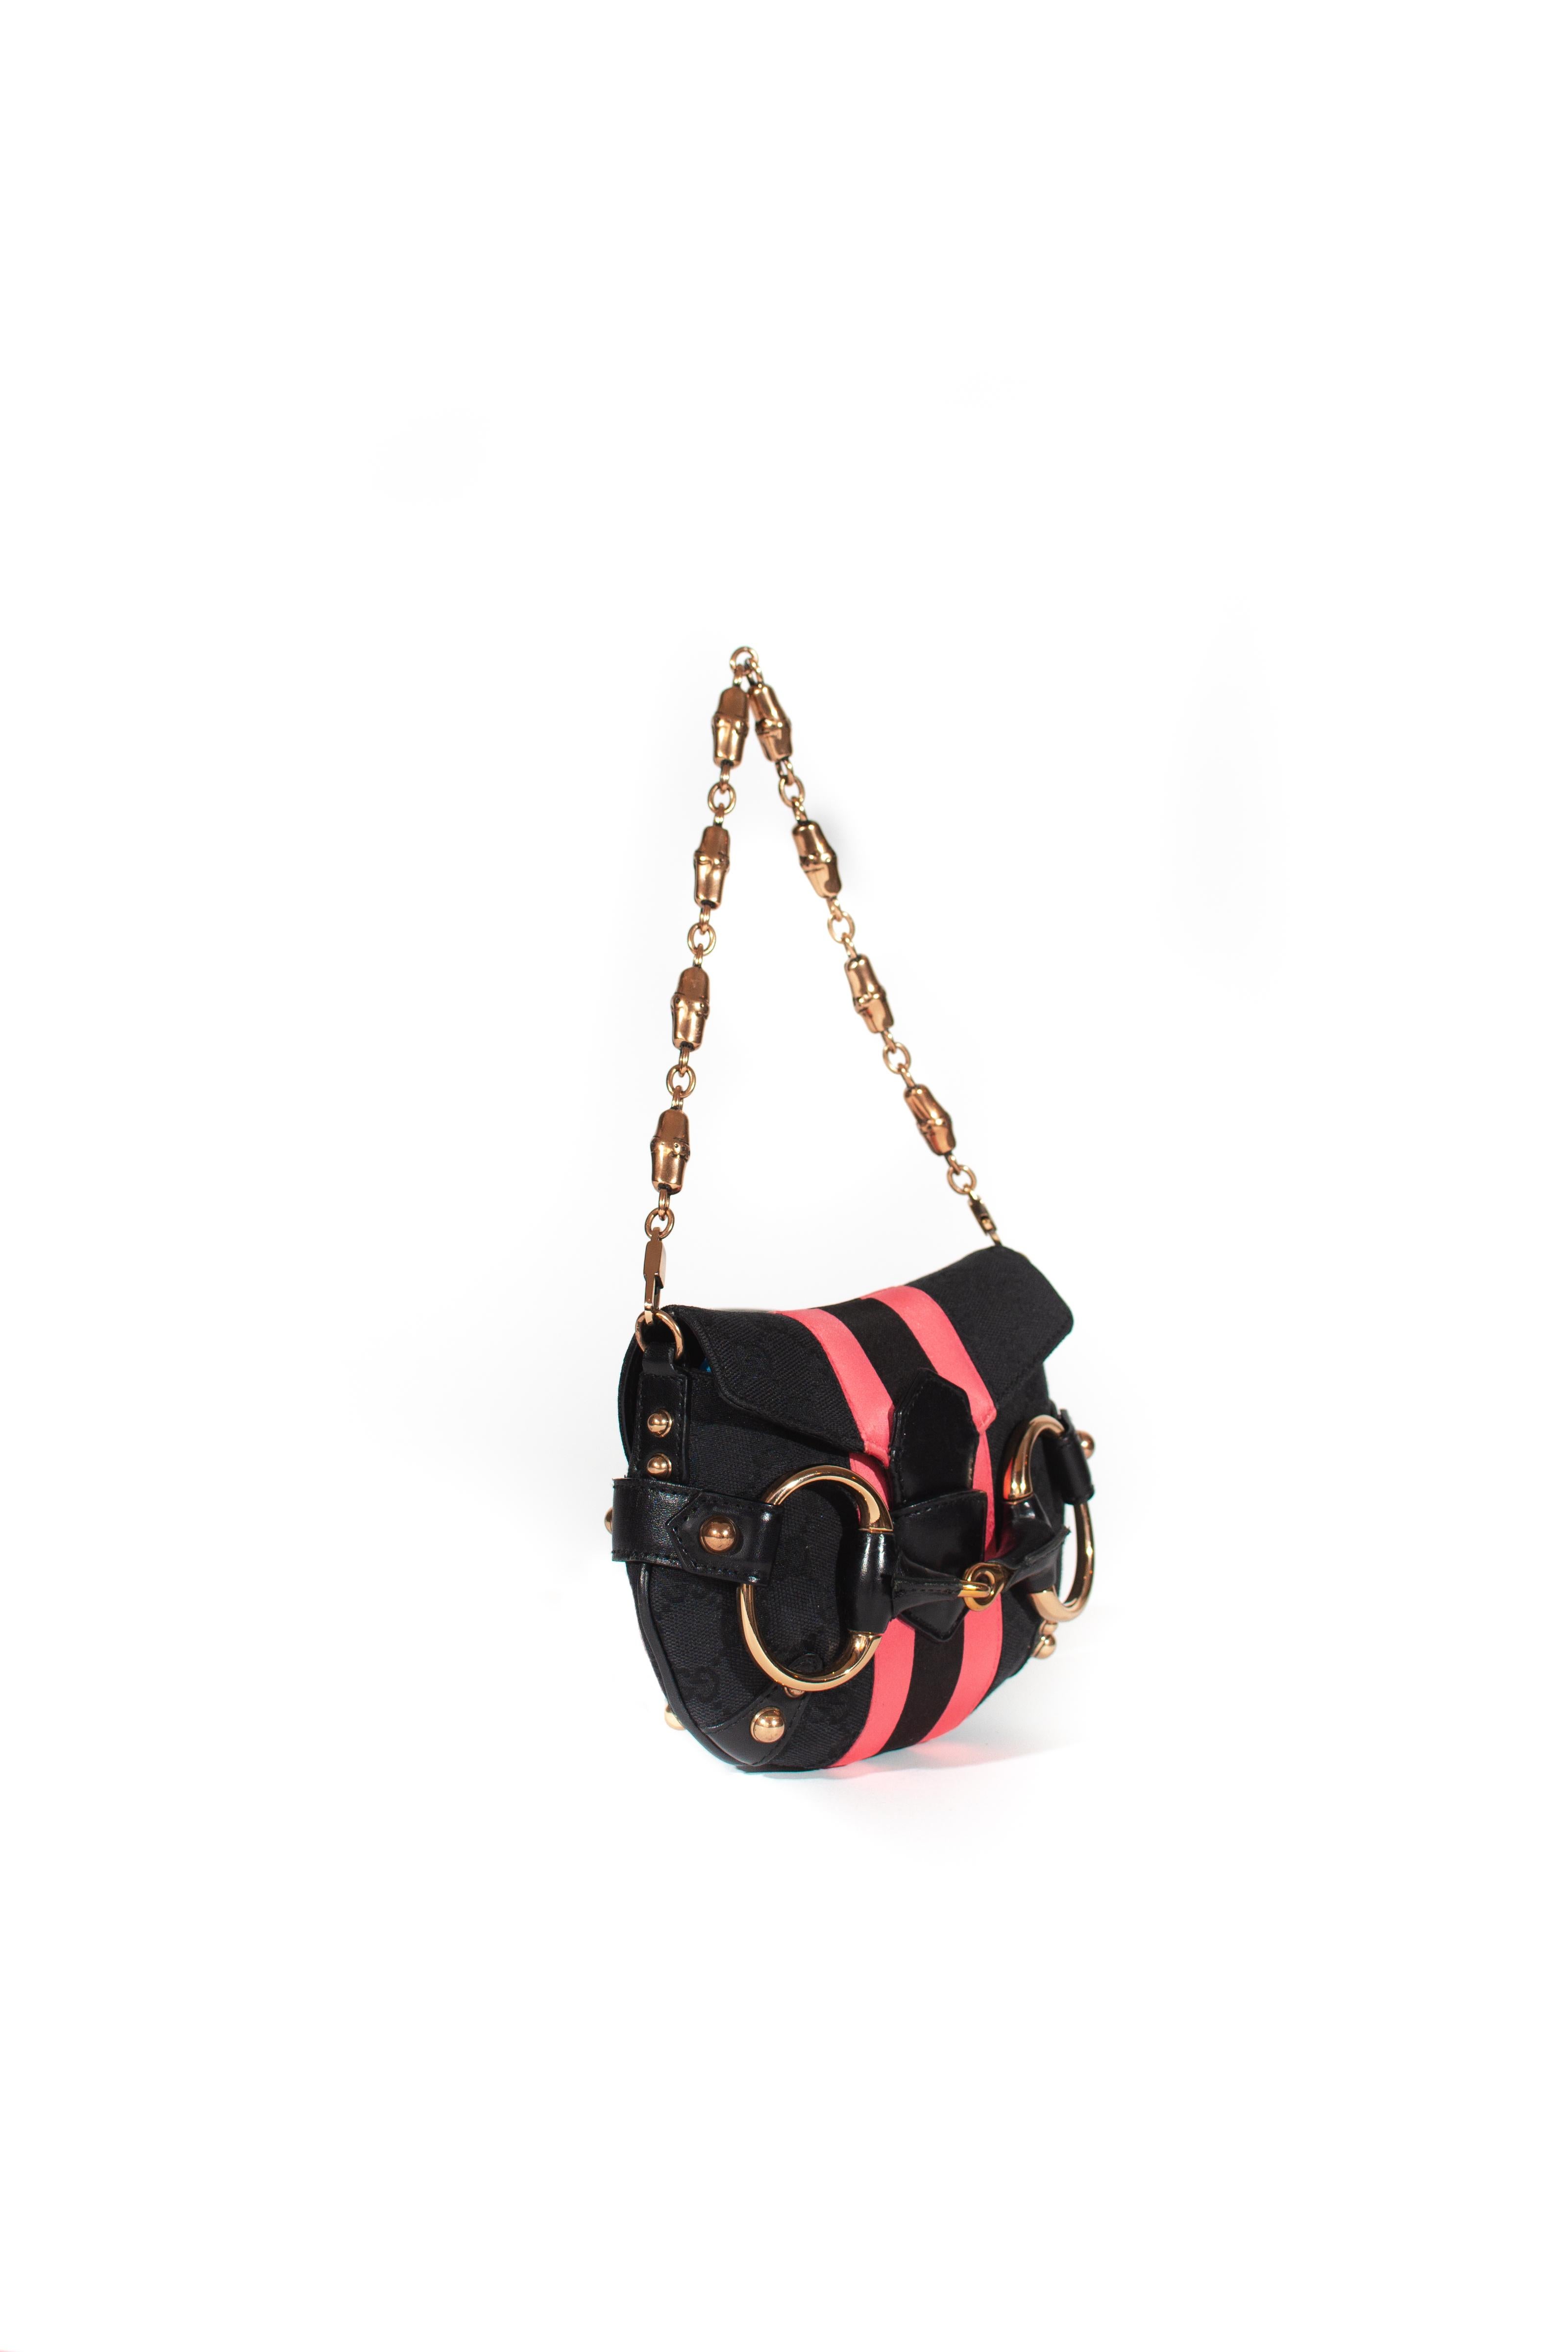 Presenting  Designed by Tom Ford during his tenure at the house of Gucci, this bag represents Tom's interpretation of many of Gucci's classic elements ('GG' canvas, horse bits, etc.). This mini evening convertible bag is constructed of black 'GG'